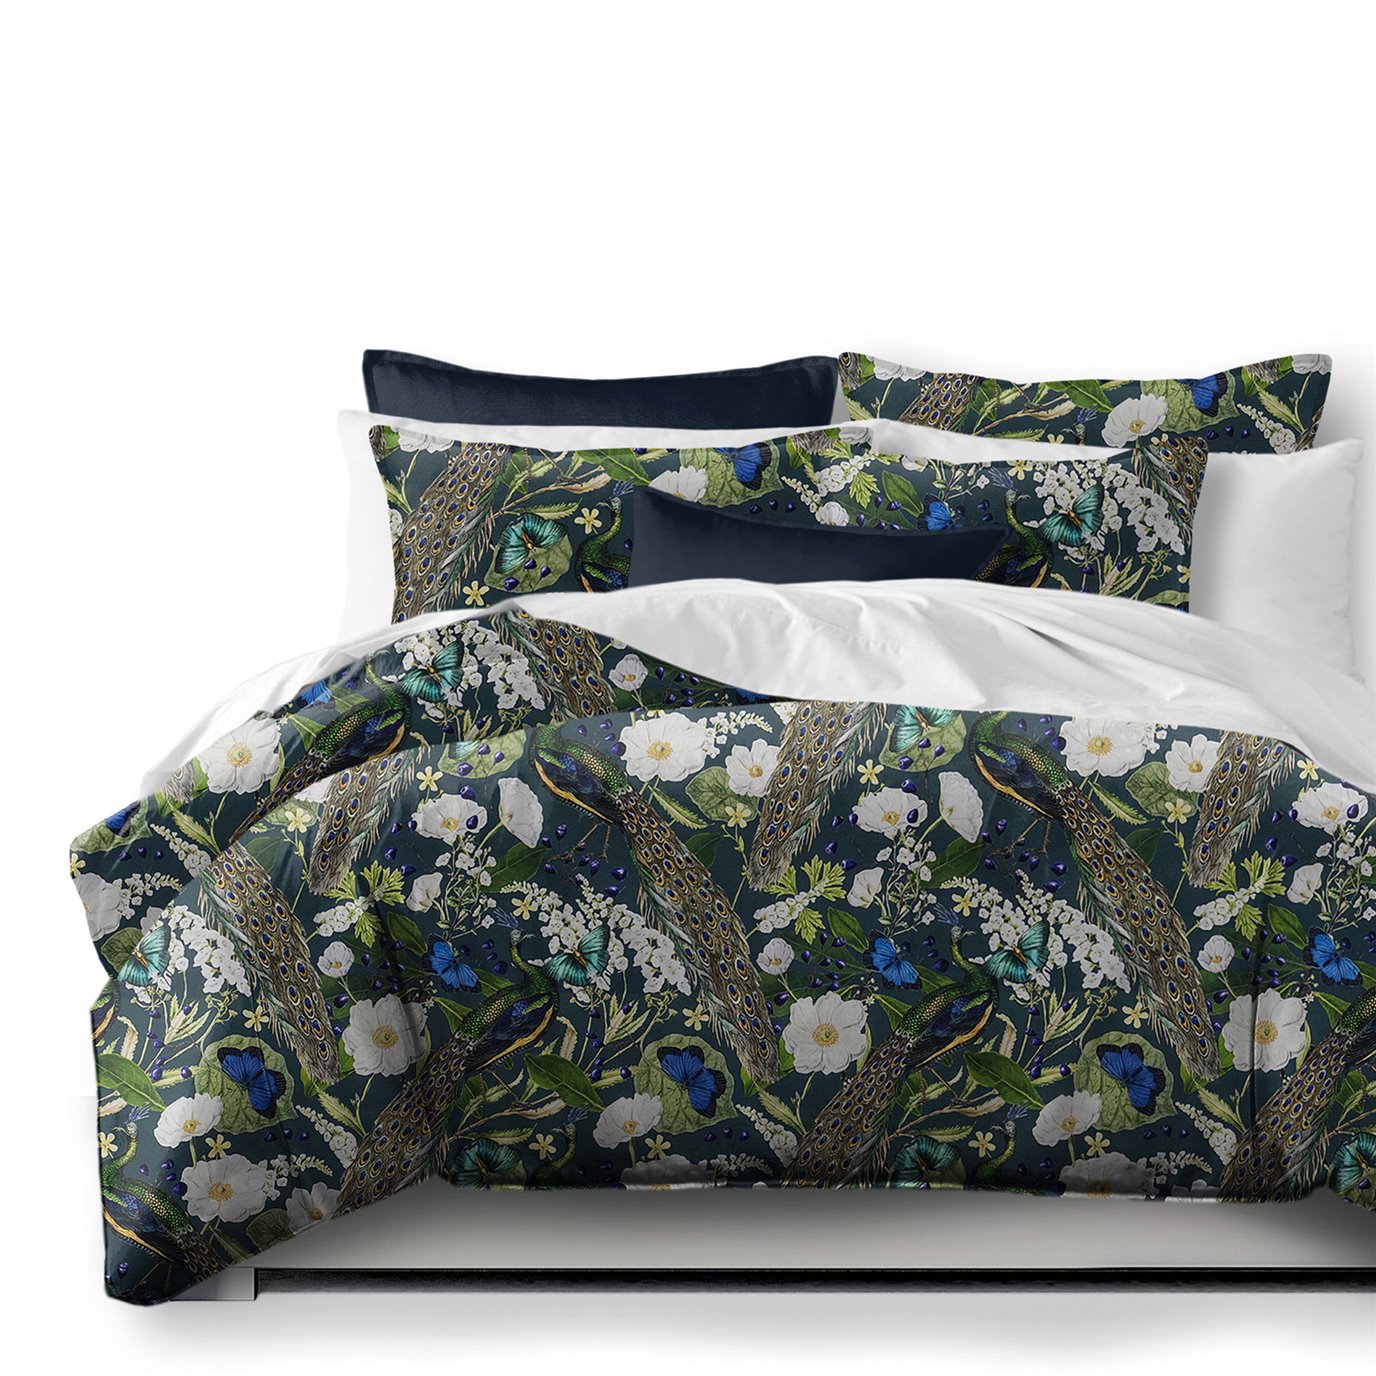 Peacock Print Teal/Navy Duvet Cover and Pillow Sham(s) Set - Size Super King